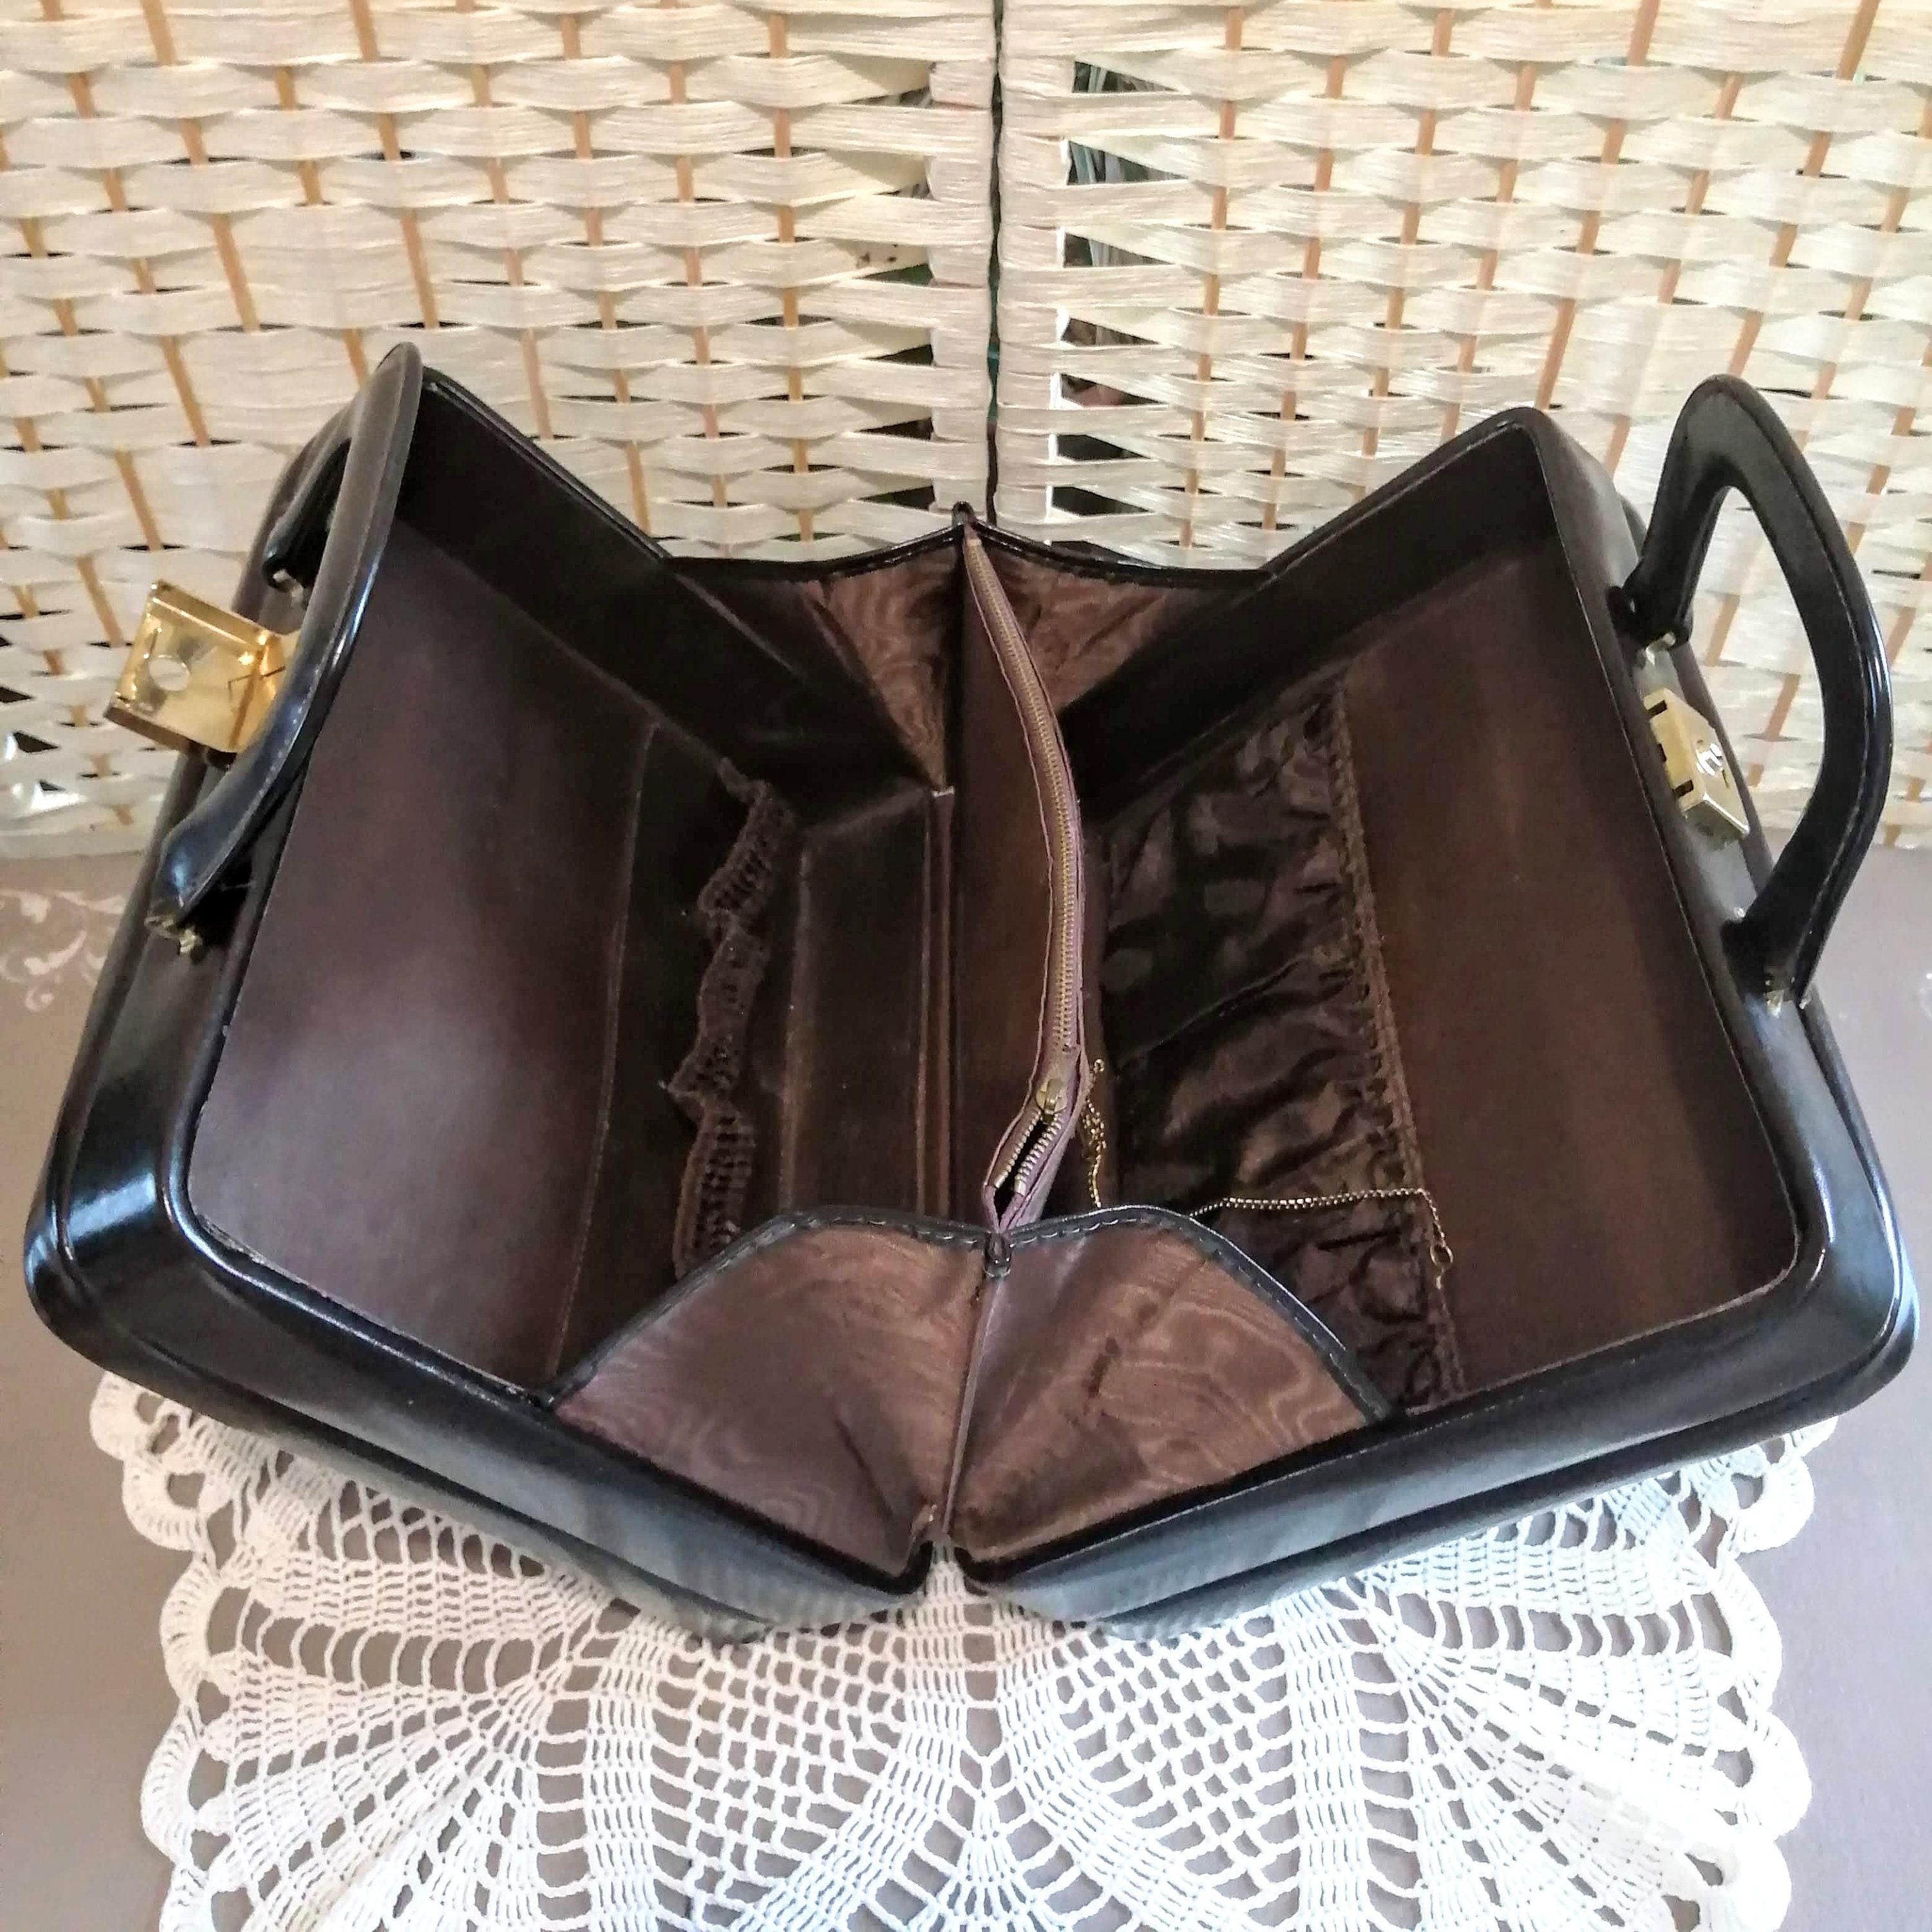 1960s/70s Vintage Vanity Travel Case for Toiletries Ideal - Etsy